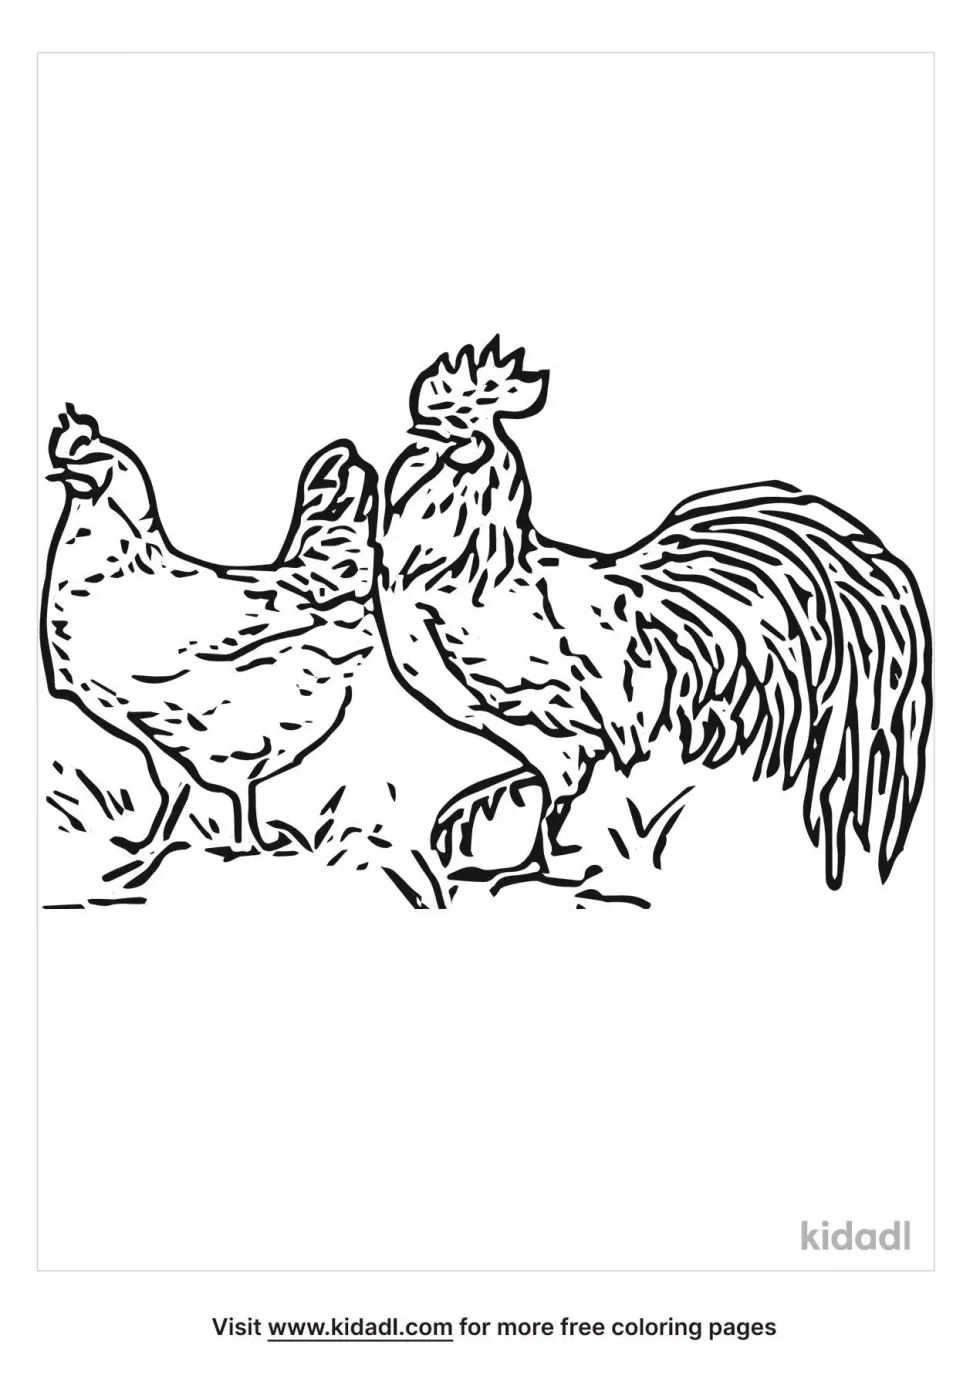 Hen And Rooster Coloring Page